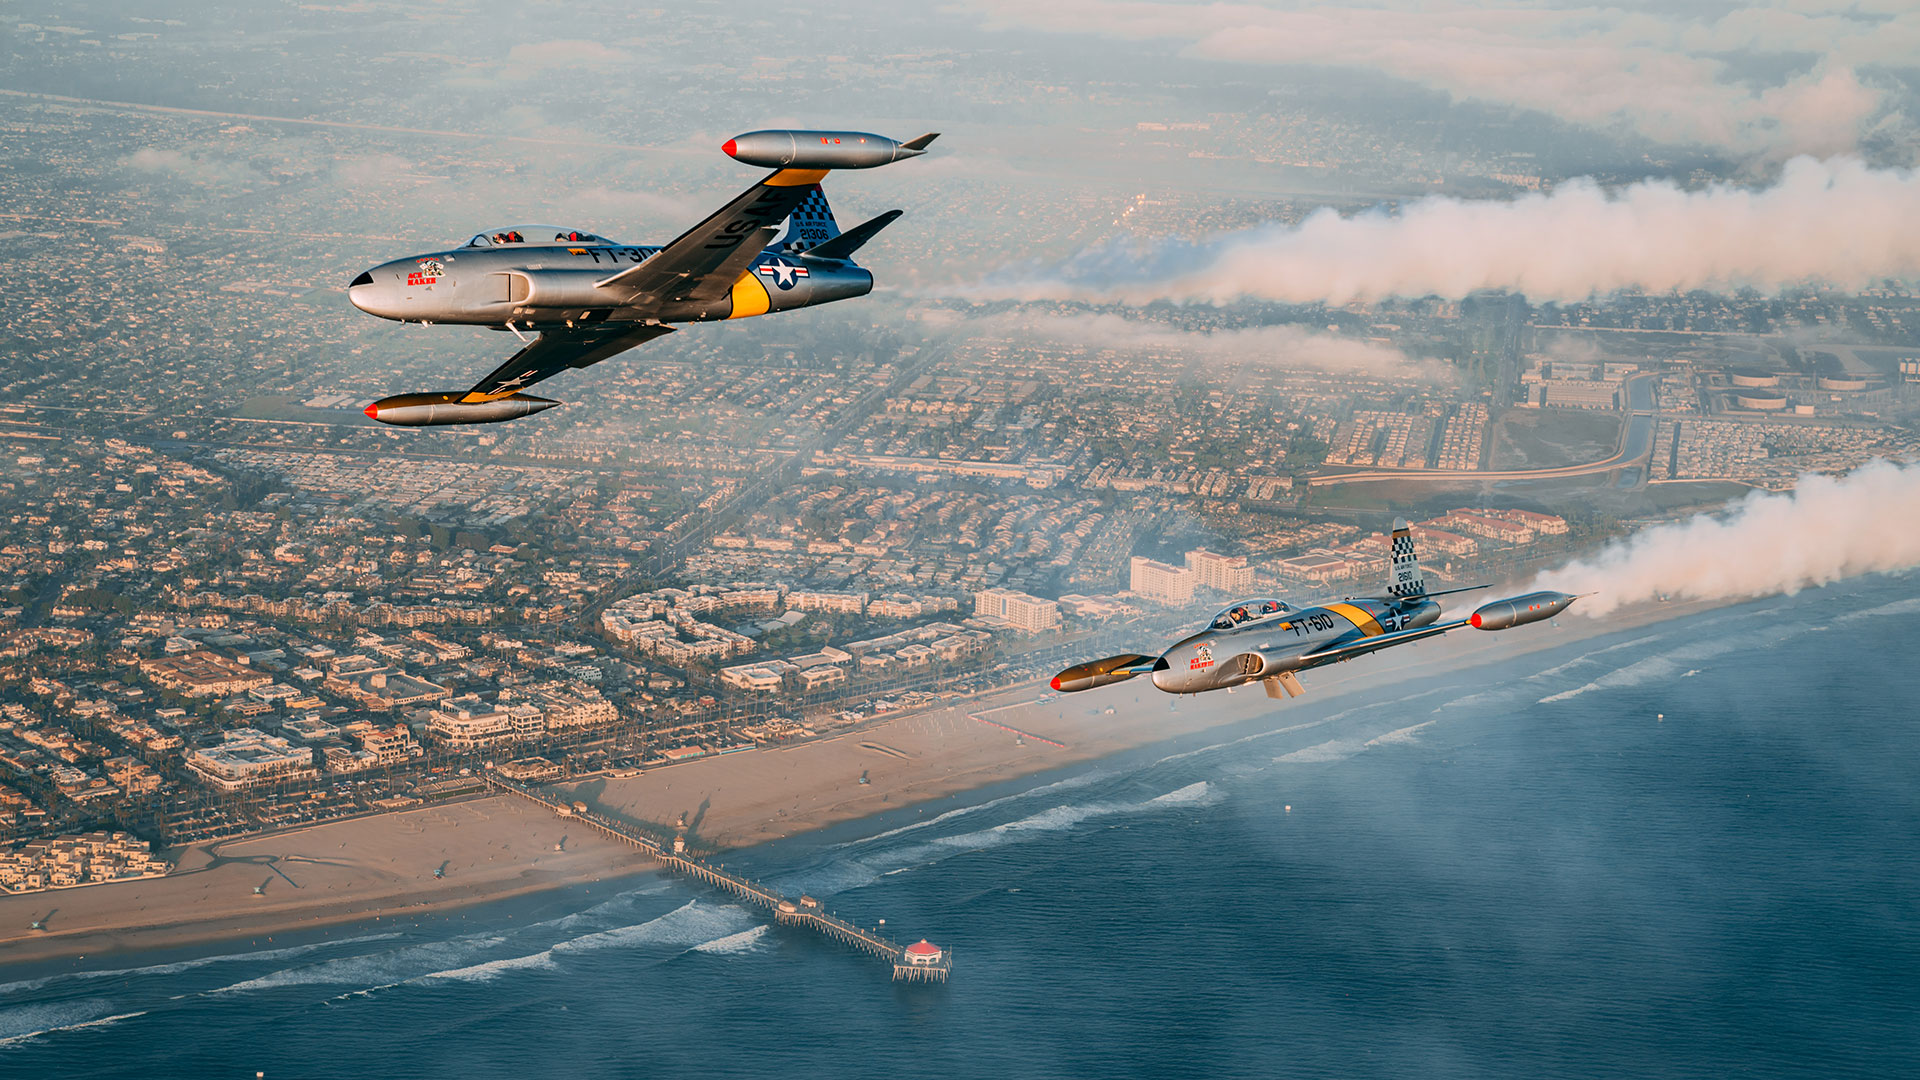 PACIFIC AIRSHOW 2022